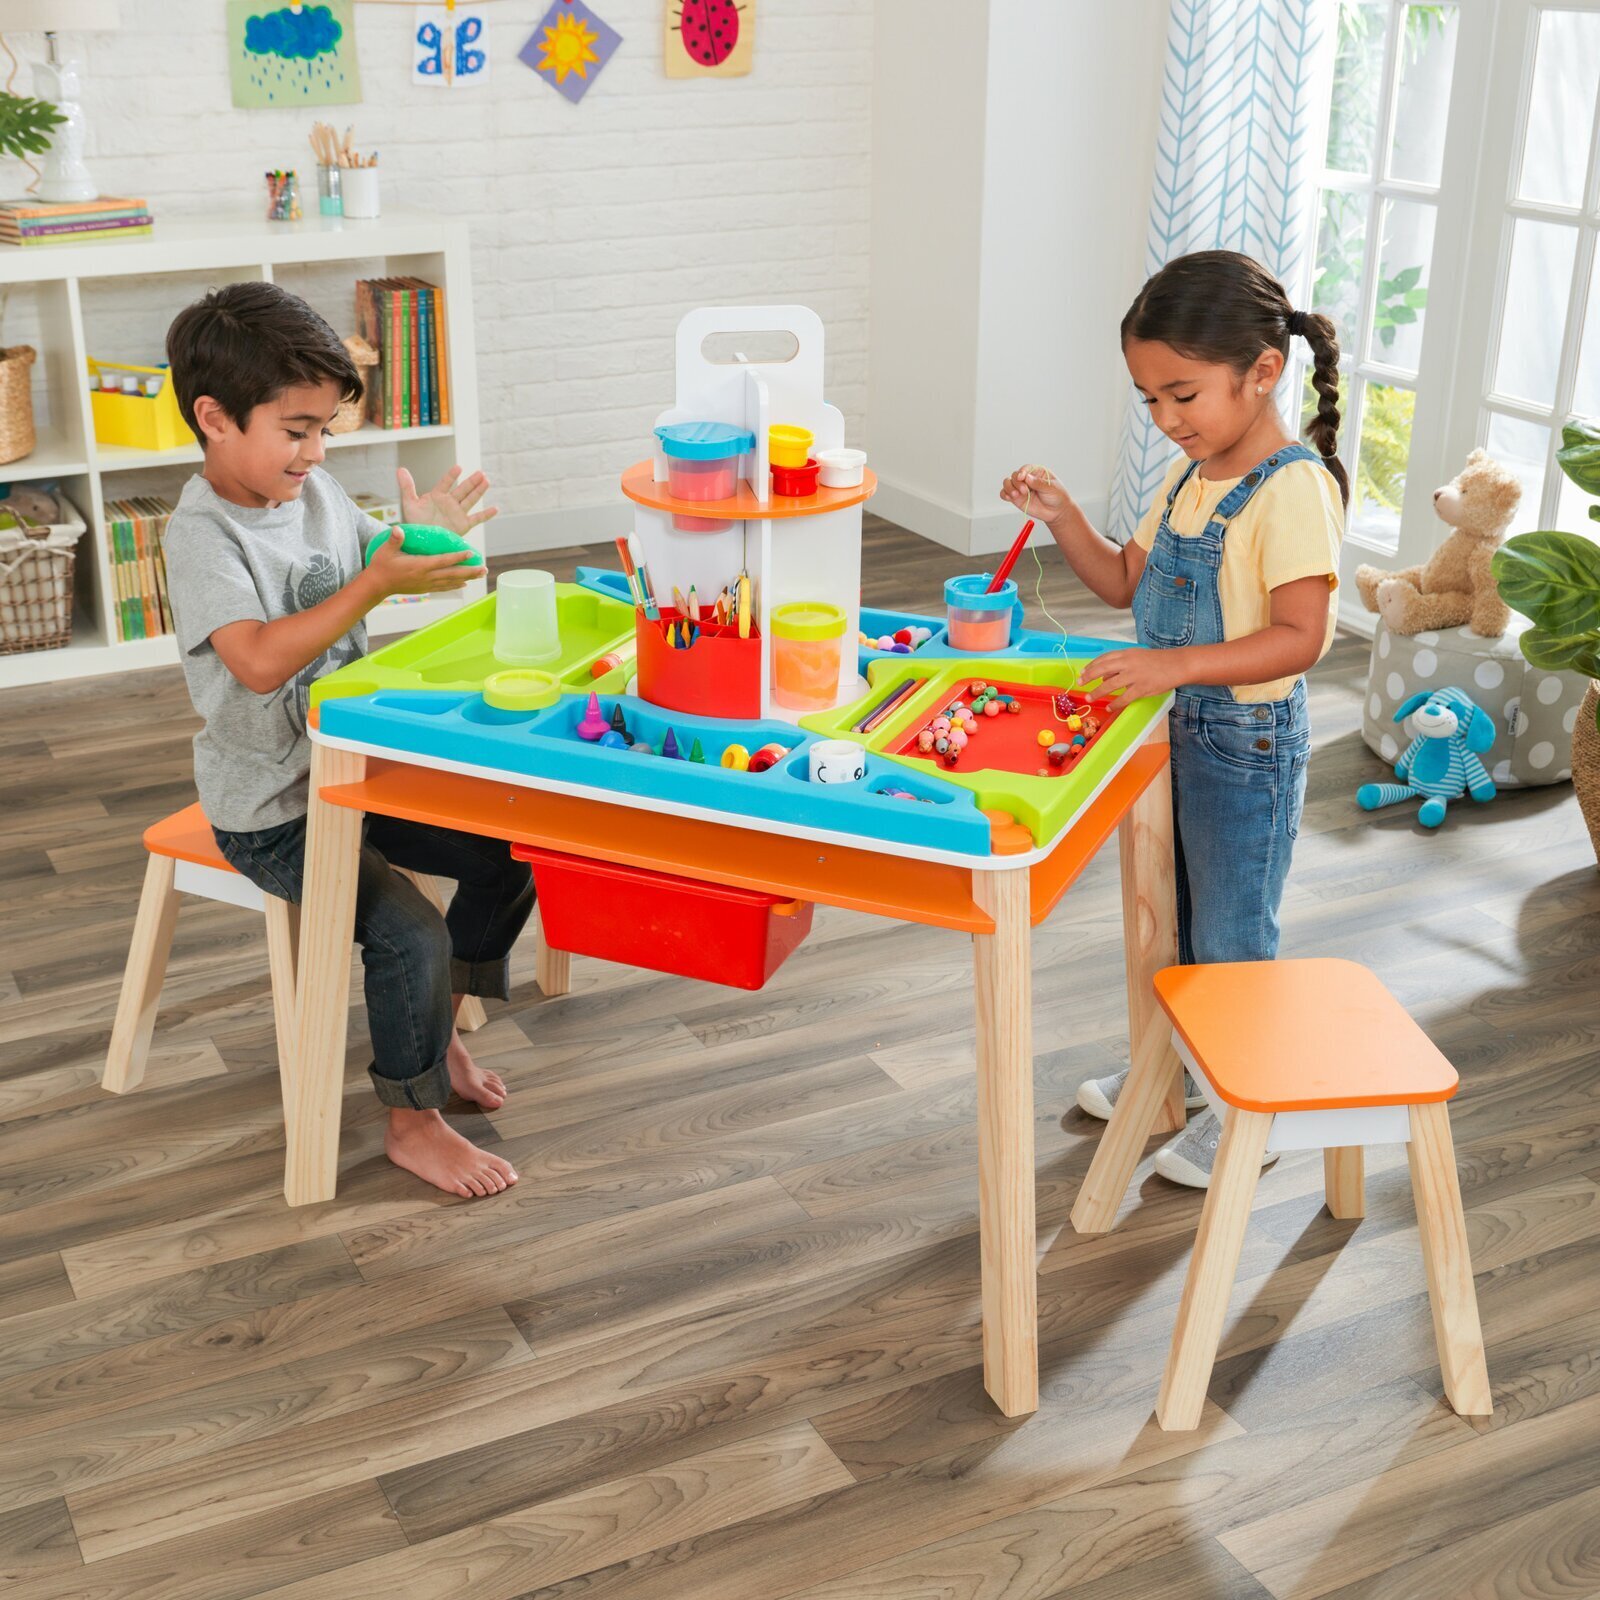 https://foter.com/photos/420/kids-rectangular-arts-and-crafts-table-with-rotating-tower-and-chair-set.jpeg